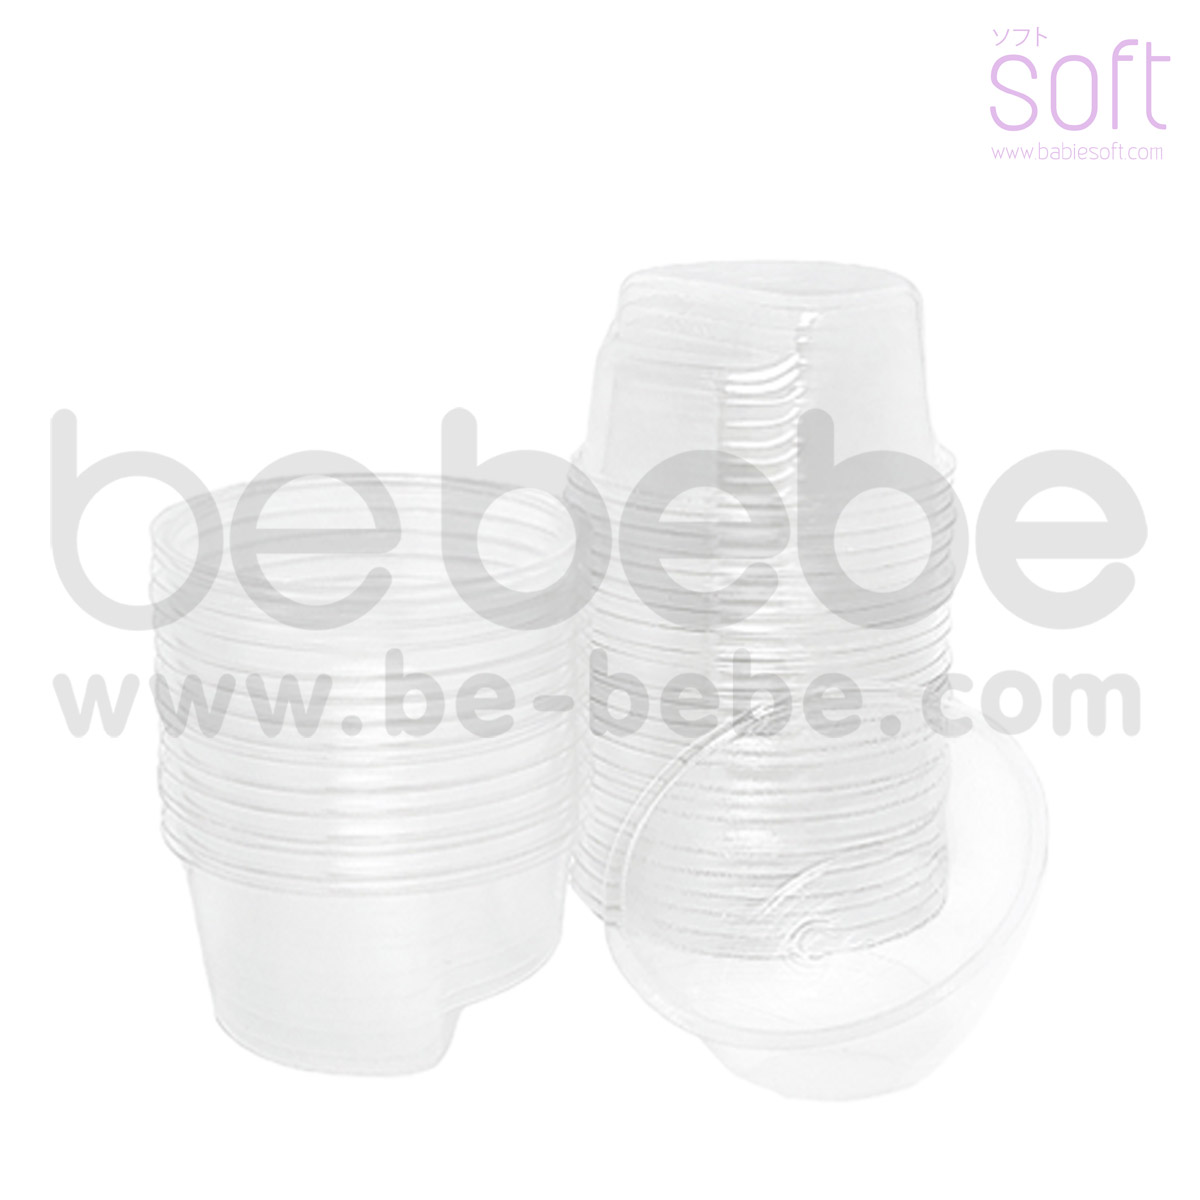 BabieSoft : Refillable Hygienic 100 Disposable cups